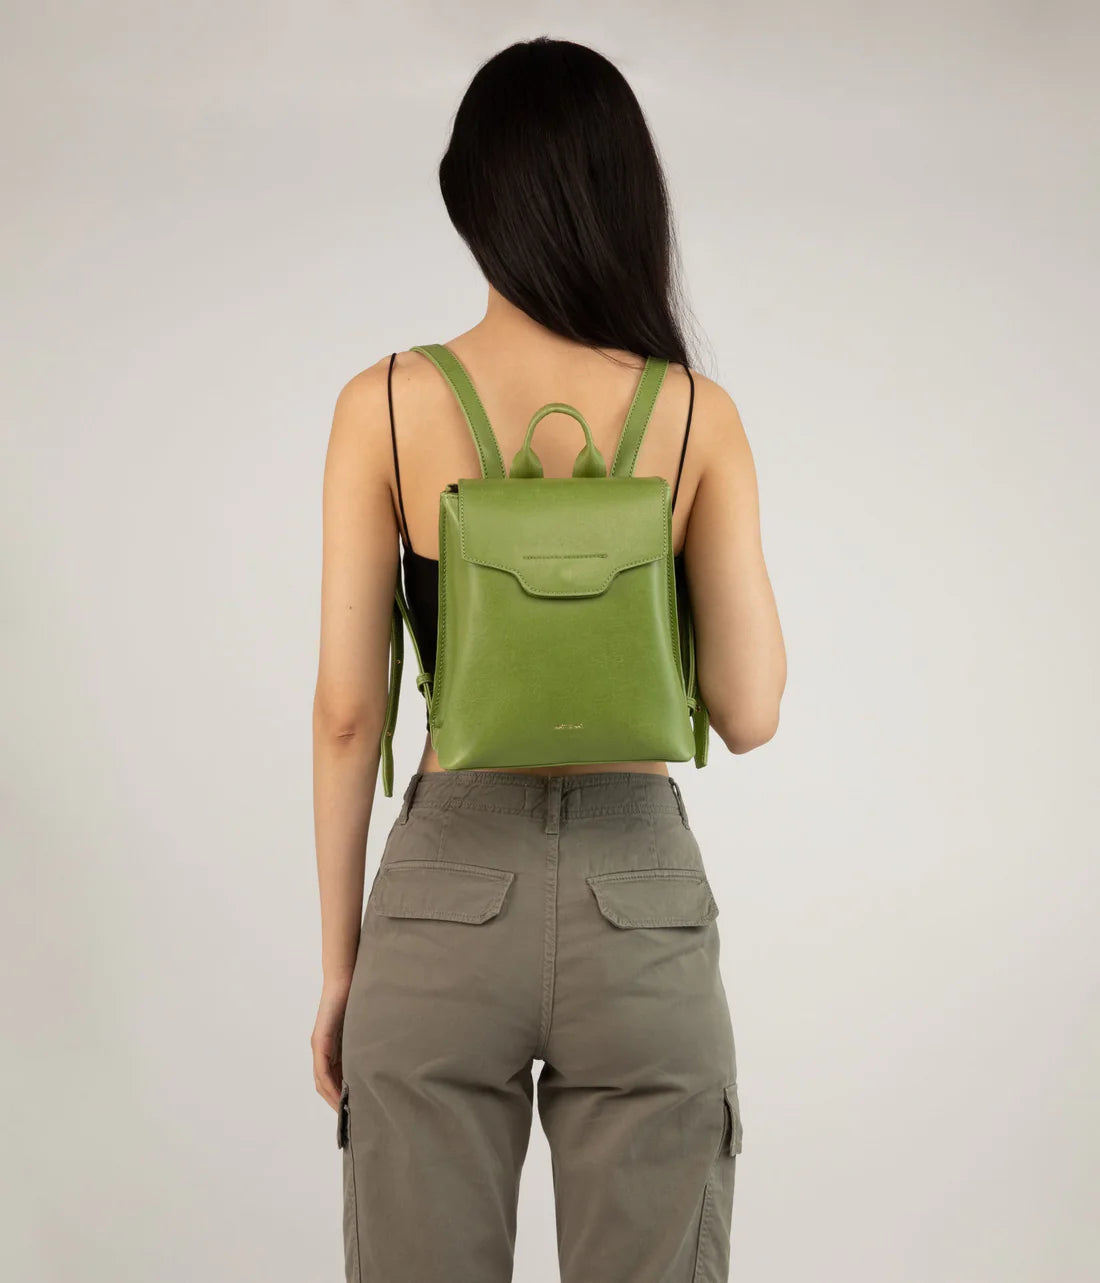 Chelle Small Vegan Backpack - Vintage Smoothie by Matt & Nat